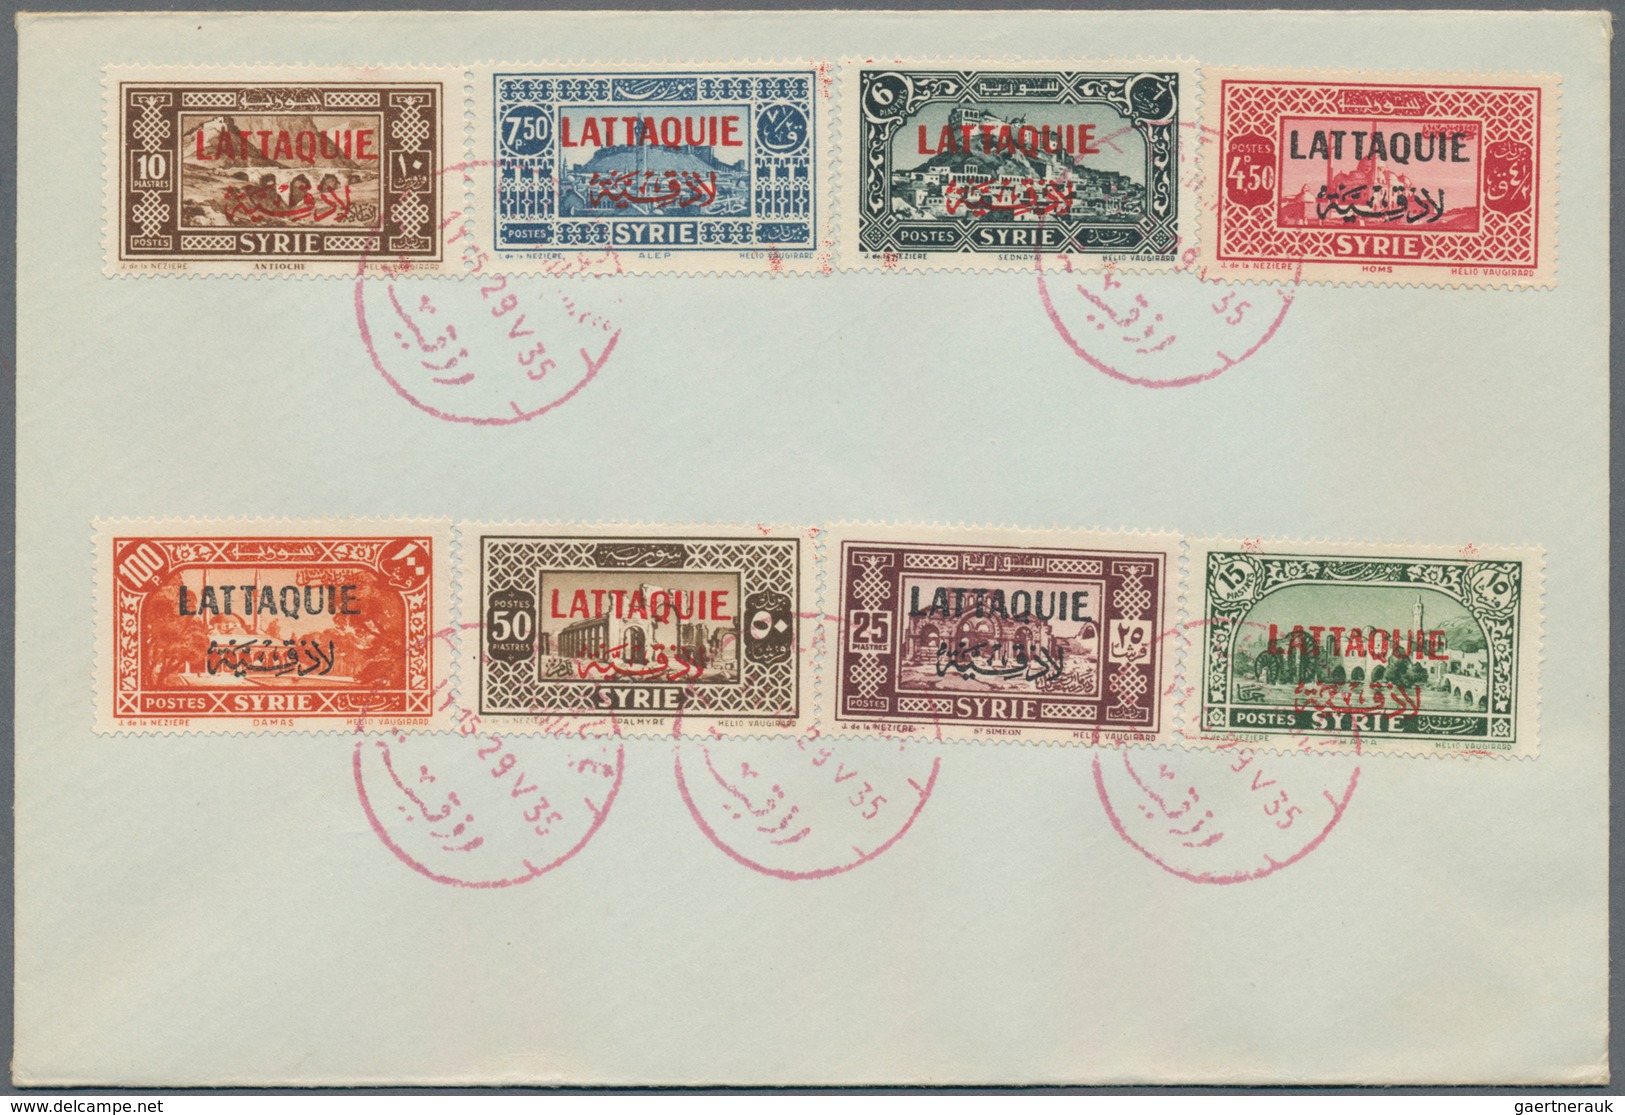 Latakia: 1924-35, Alaouites & Lattaquie 10 covers with complete set frankings (unaddressed), fine gr